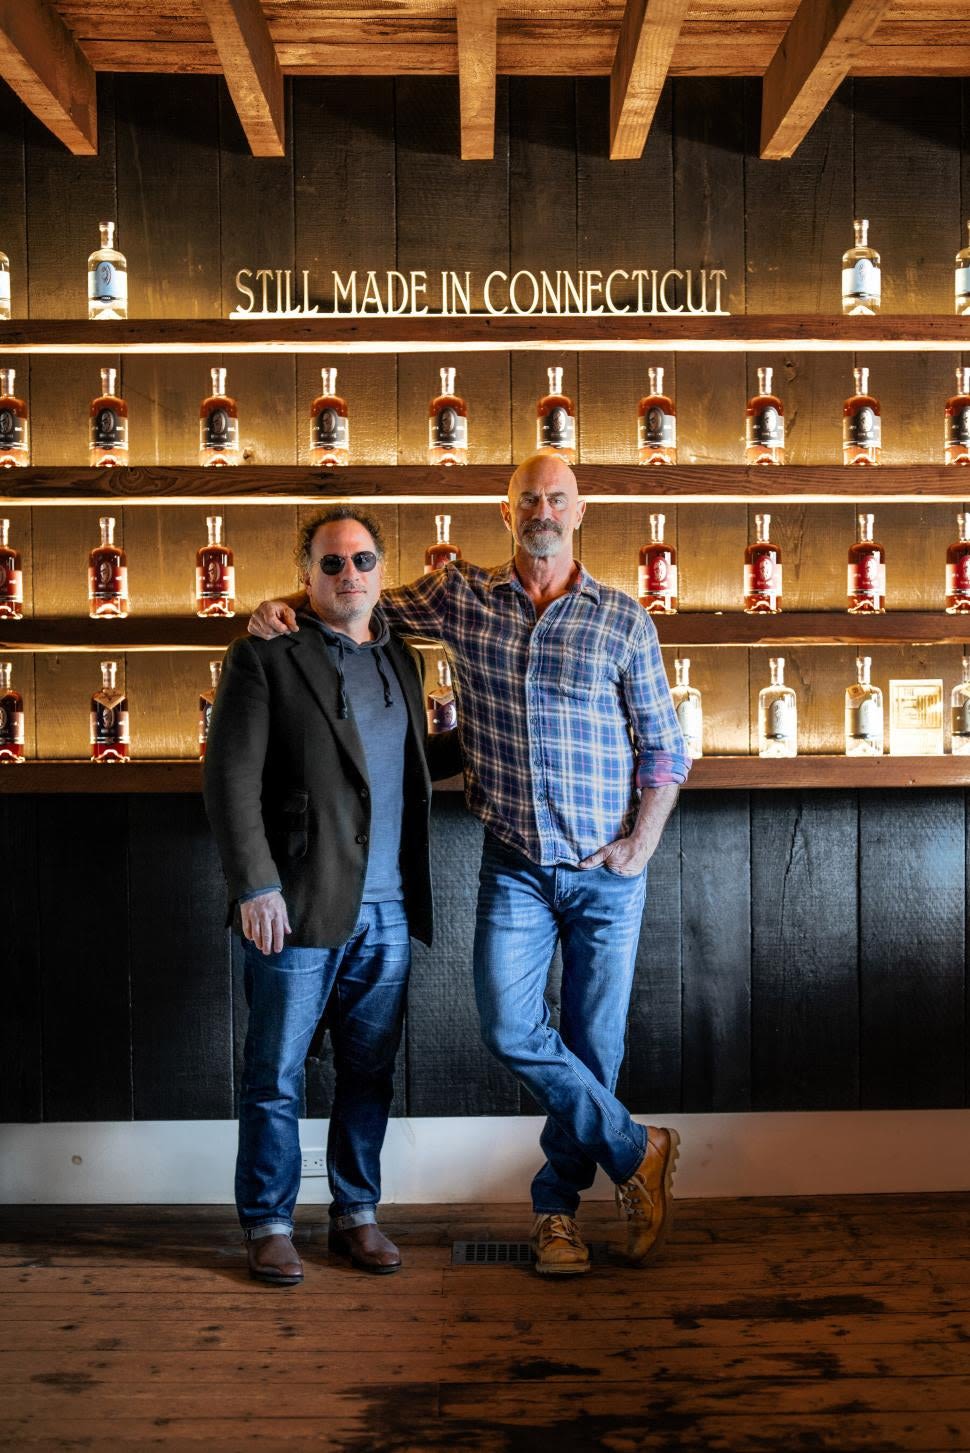 Actor Chris Meloni says CT has ‘best gin in any state’ in new ad for Roxbury craft distillery